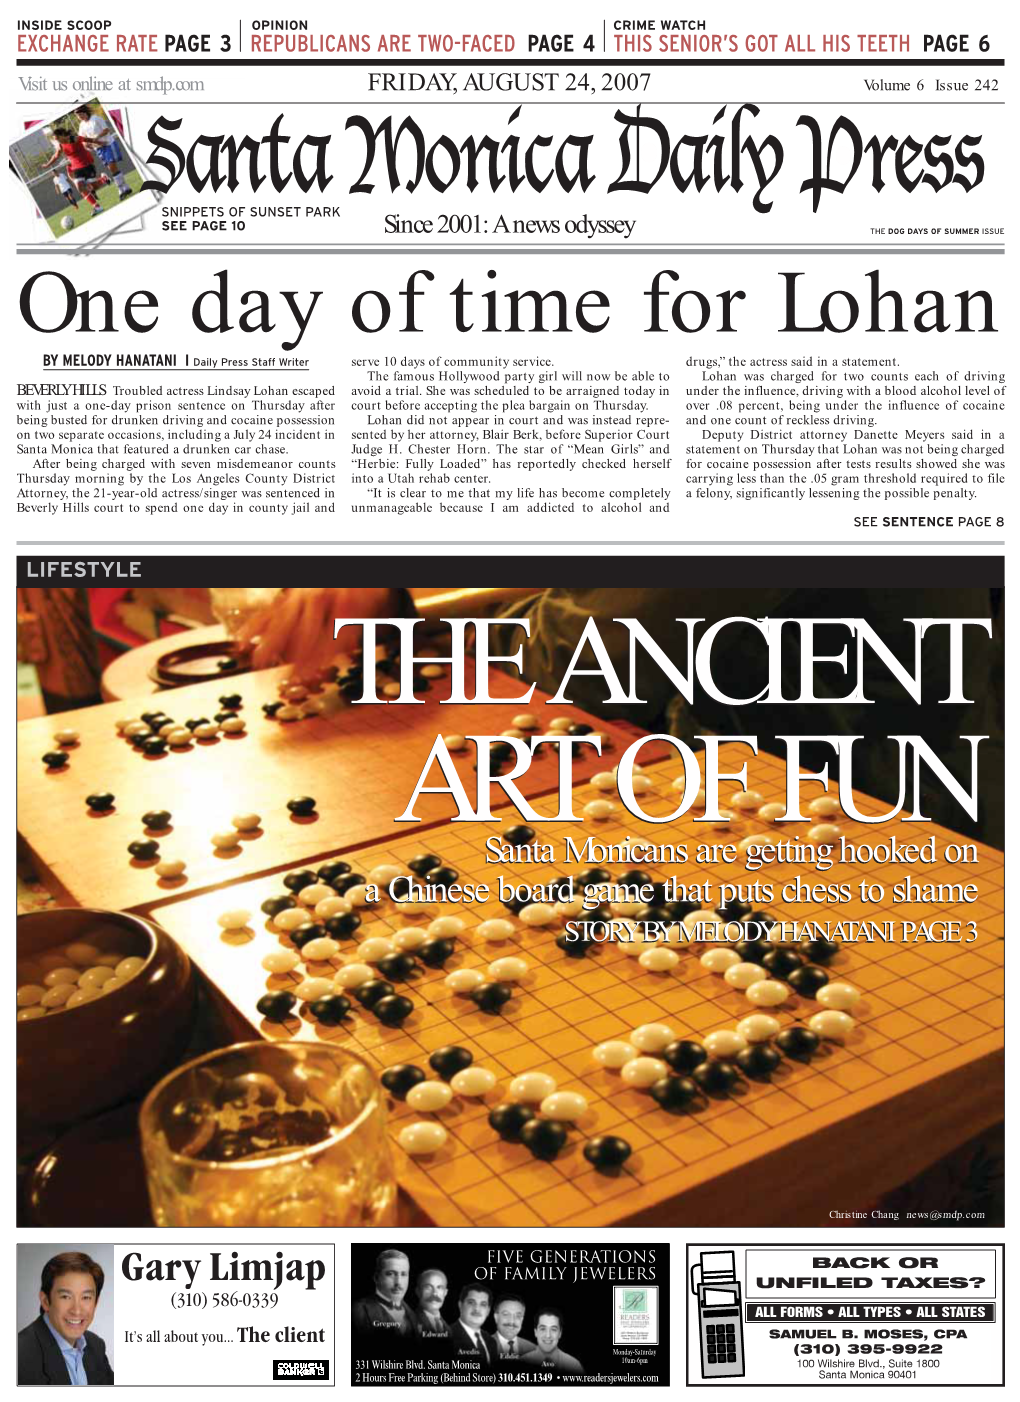 One Day of Time for Lohan by MELODY HANATANI I Daily Press Staff Writer Serve 10 Days of Community Service